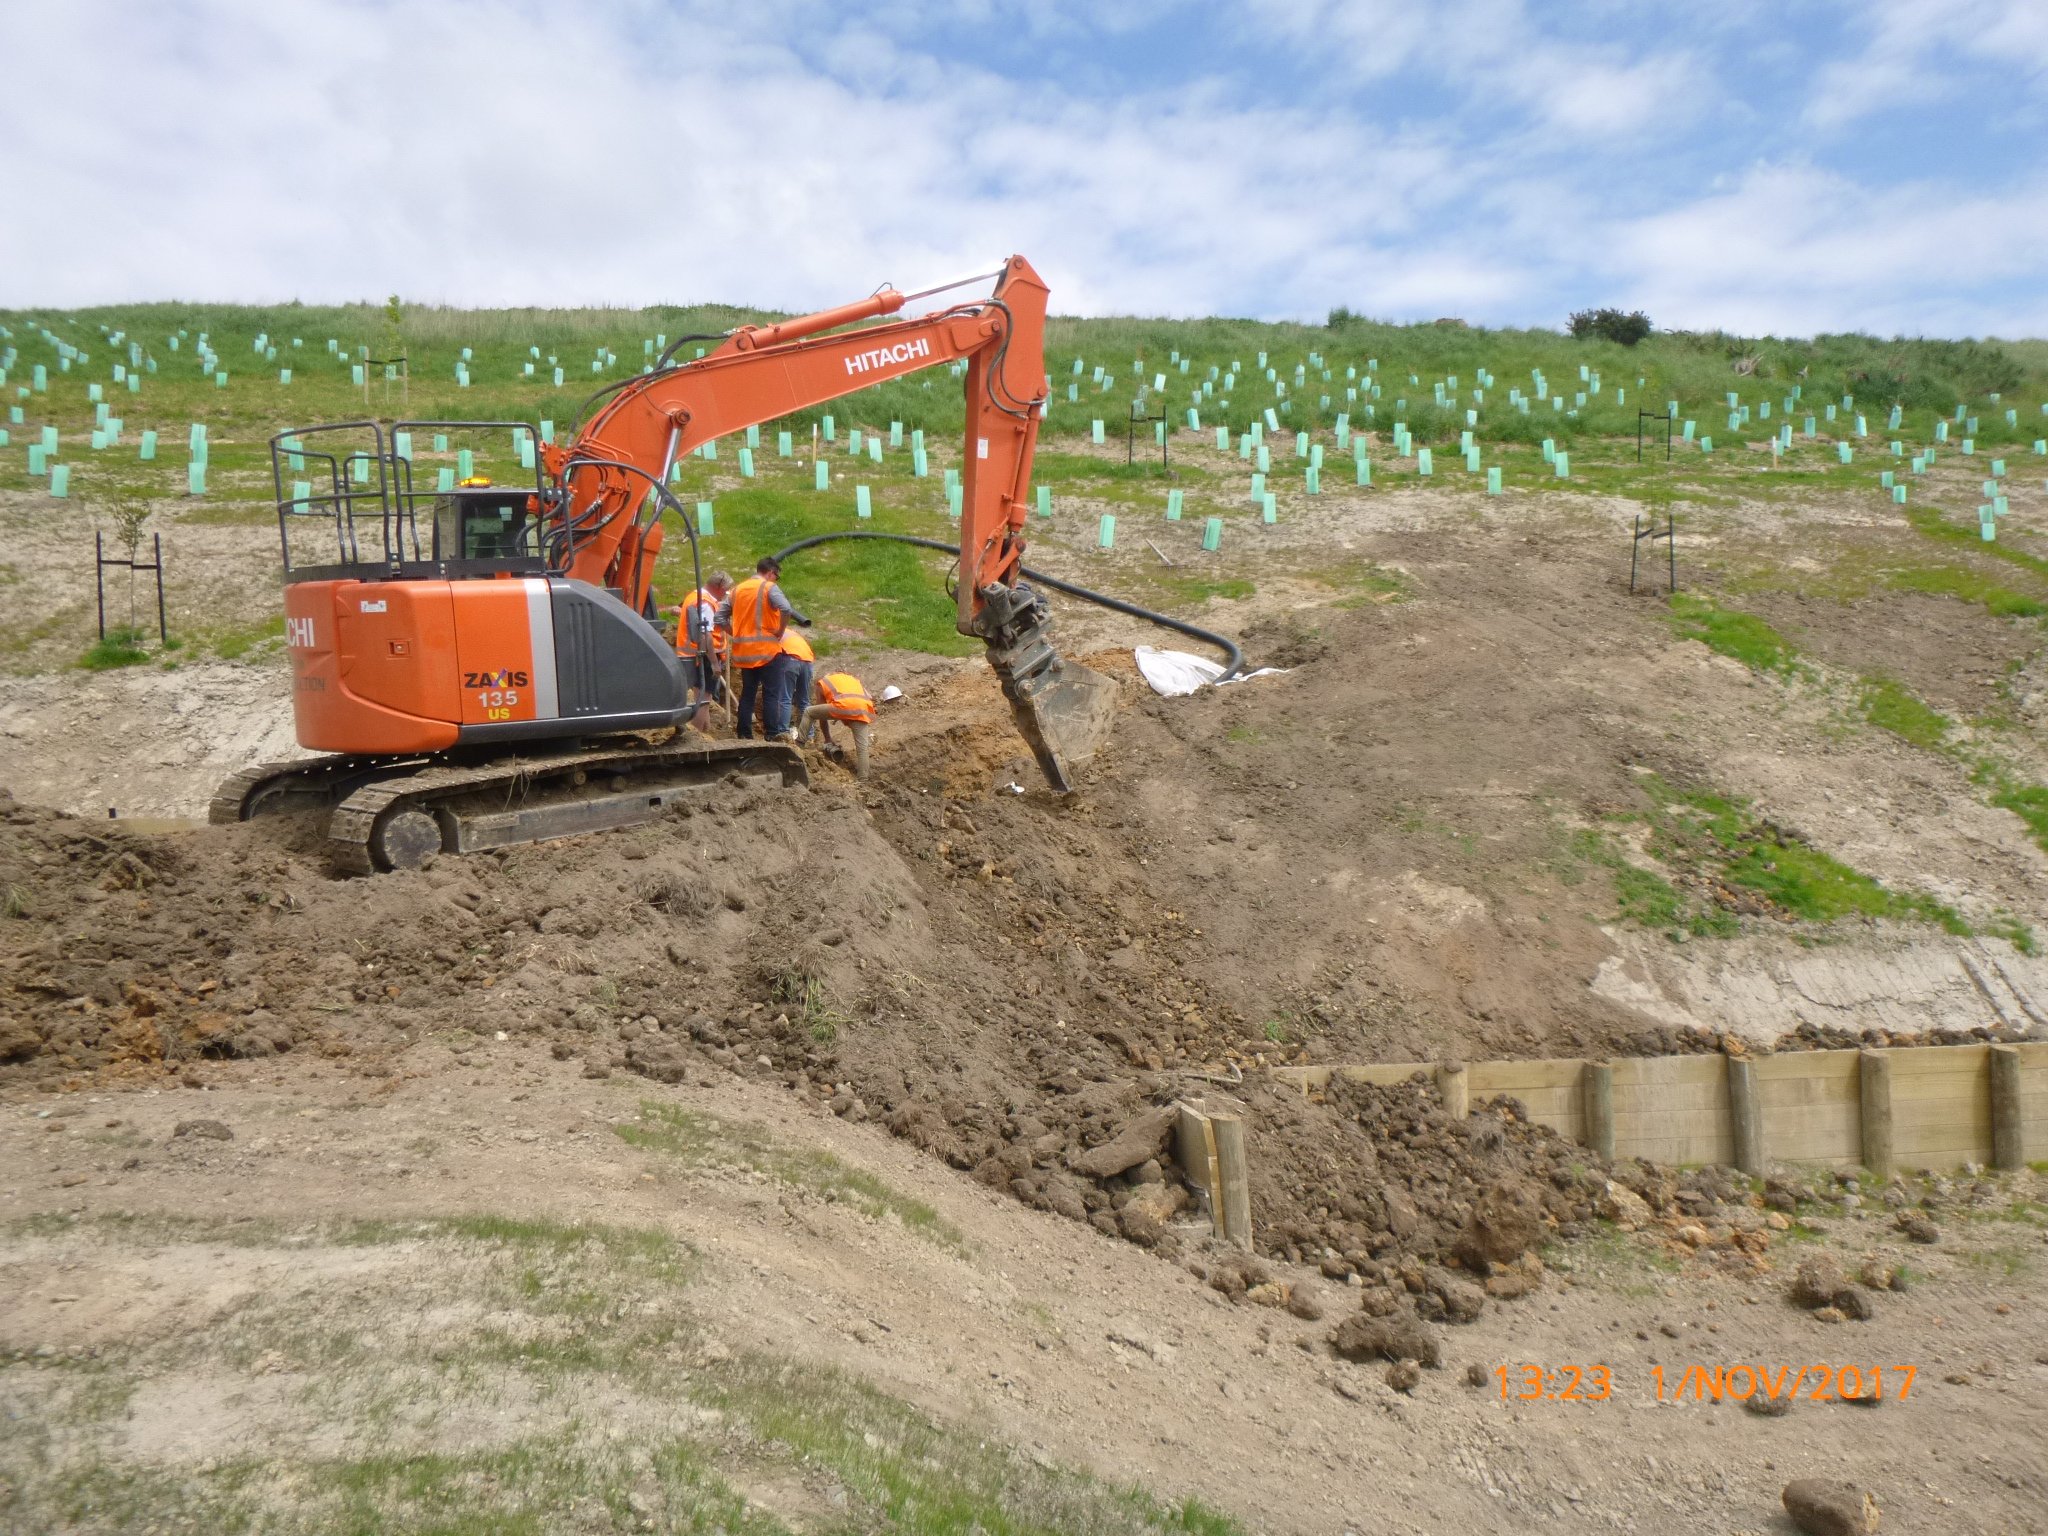  Installing subsoil drainage to improve slope stability. 